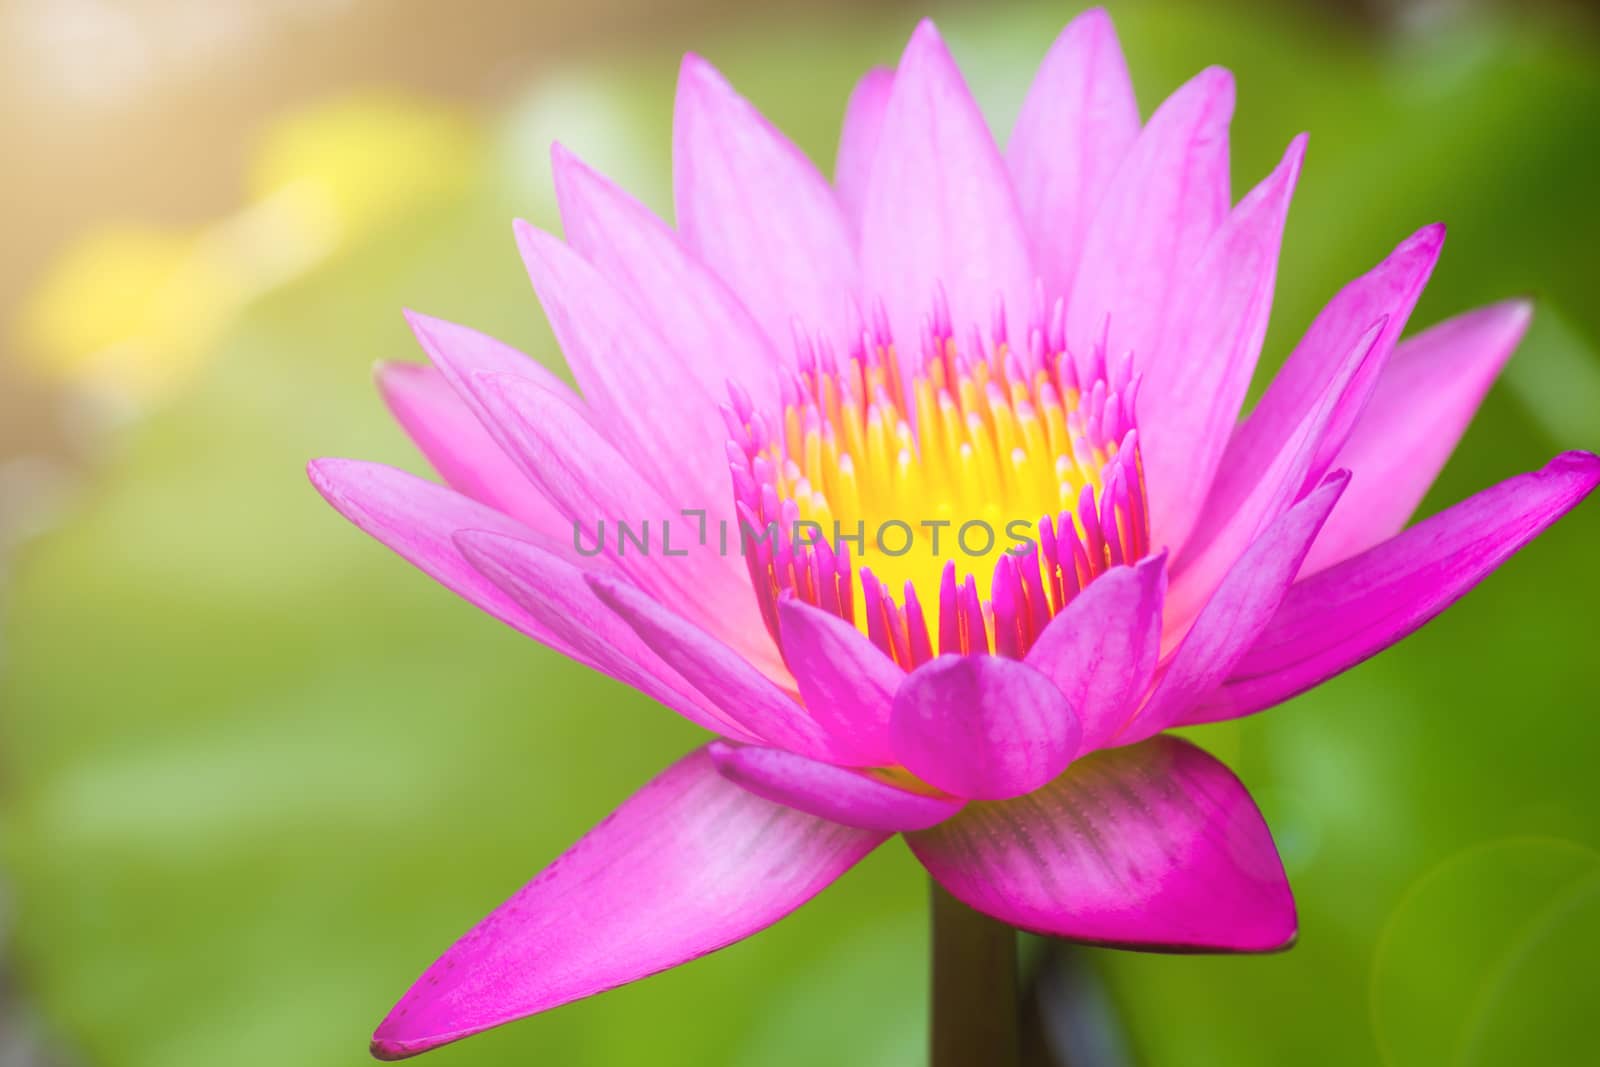 Beautiful Waterlily, Pink Lotus Flower Plants In Pond With Green Leaf Background And Sunlight. by rakoptonLPN